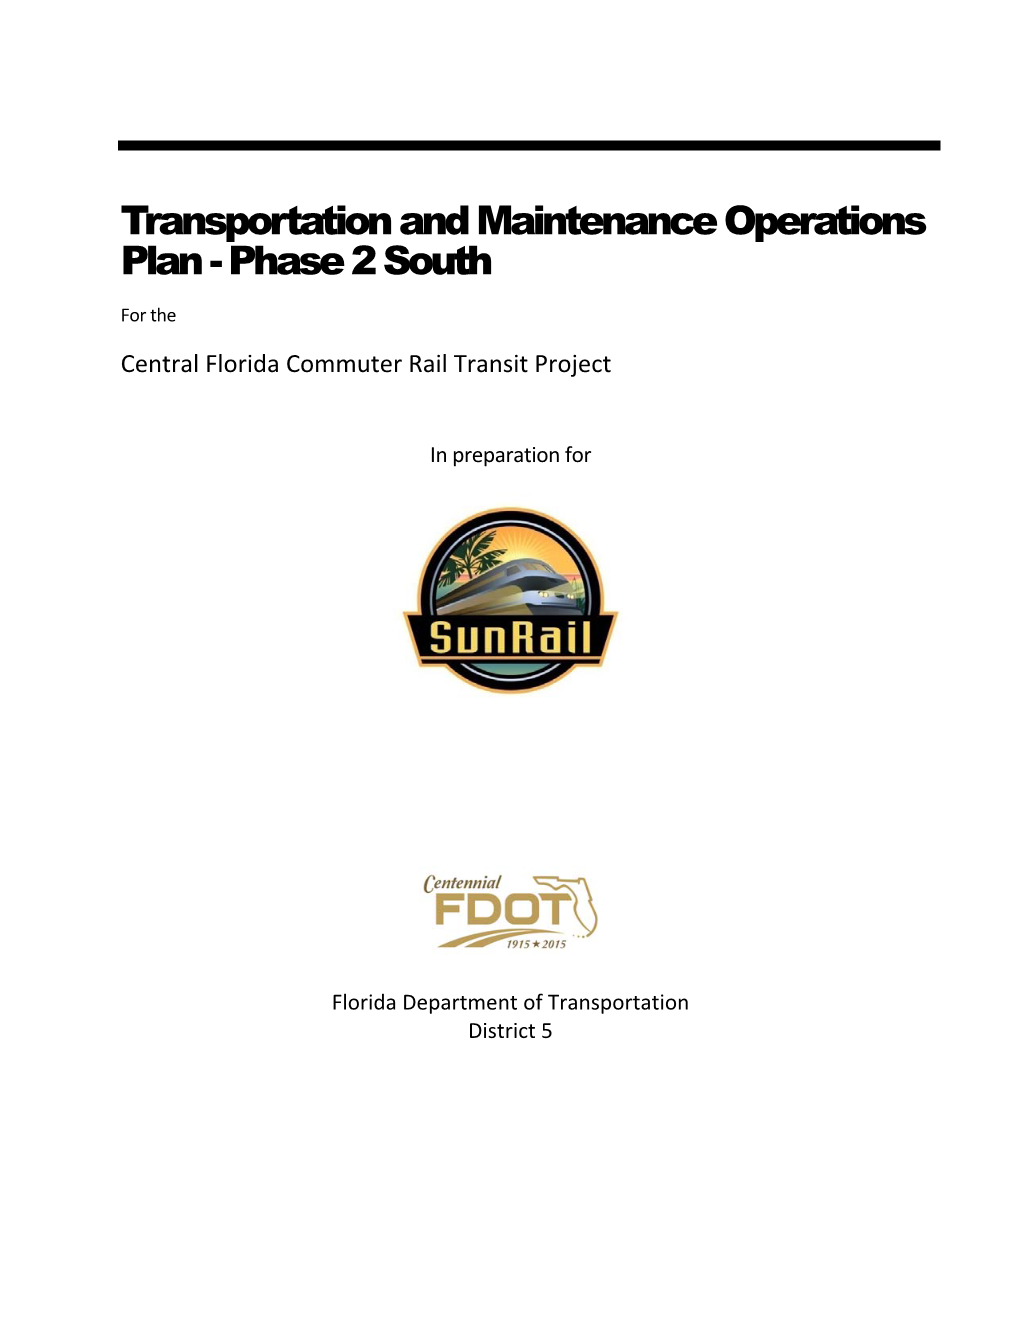 Transportation and Maintenance Operations Plan - Phase 2 South for the Central Florida Commuter Rail Transit Project